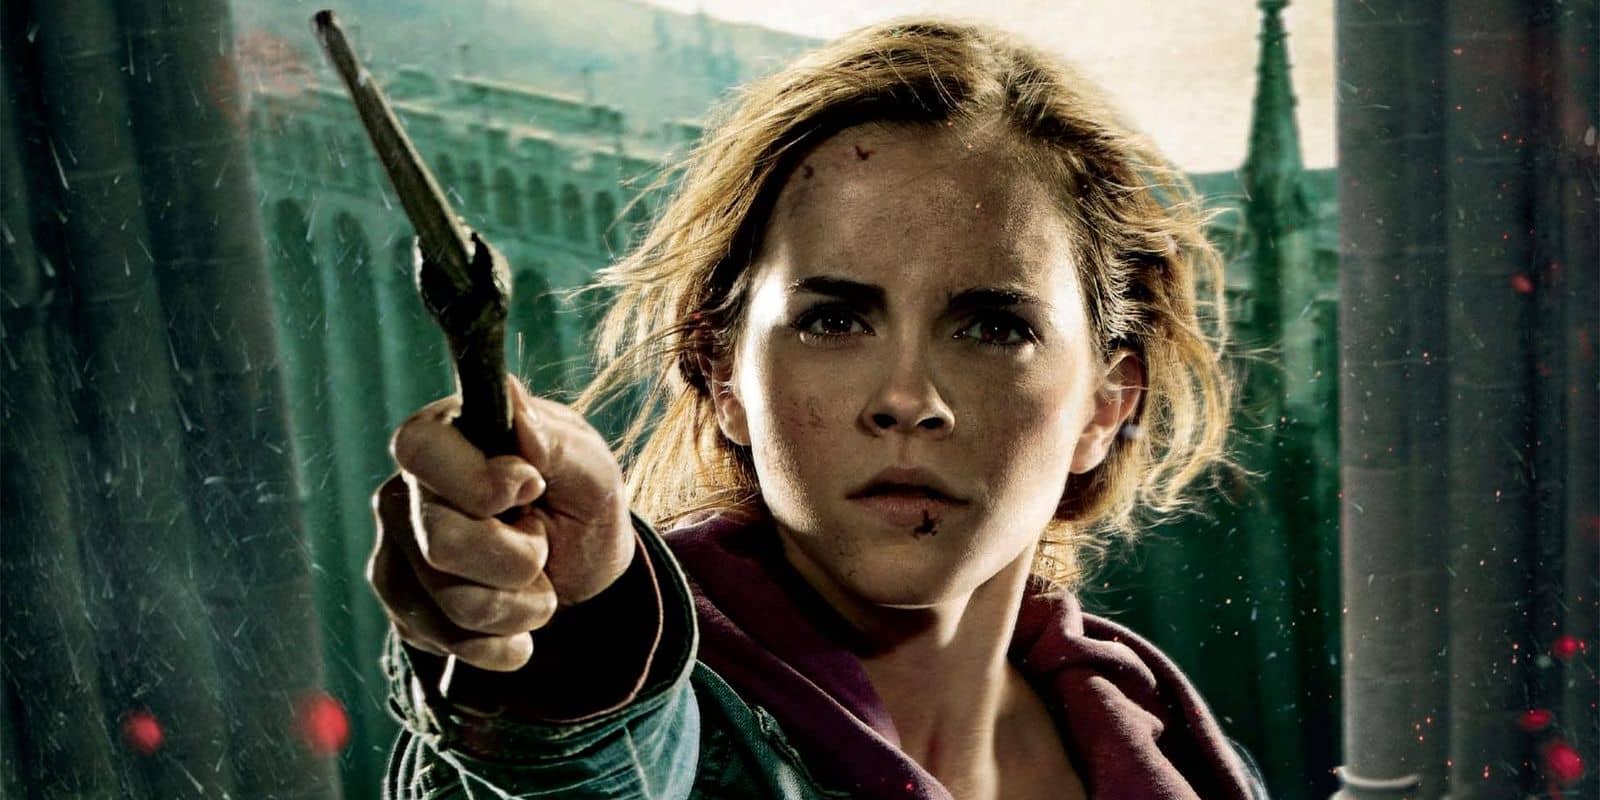 hermione-granger, secondary character, harry potter